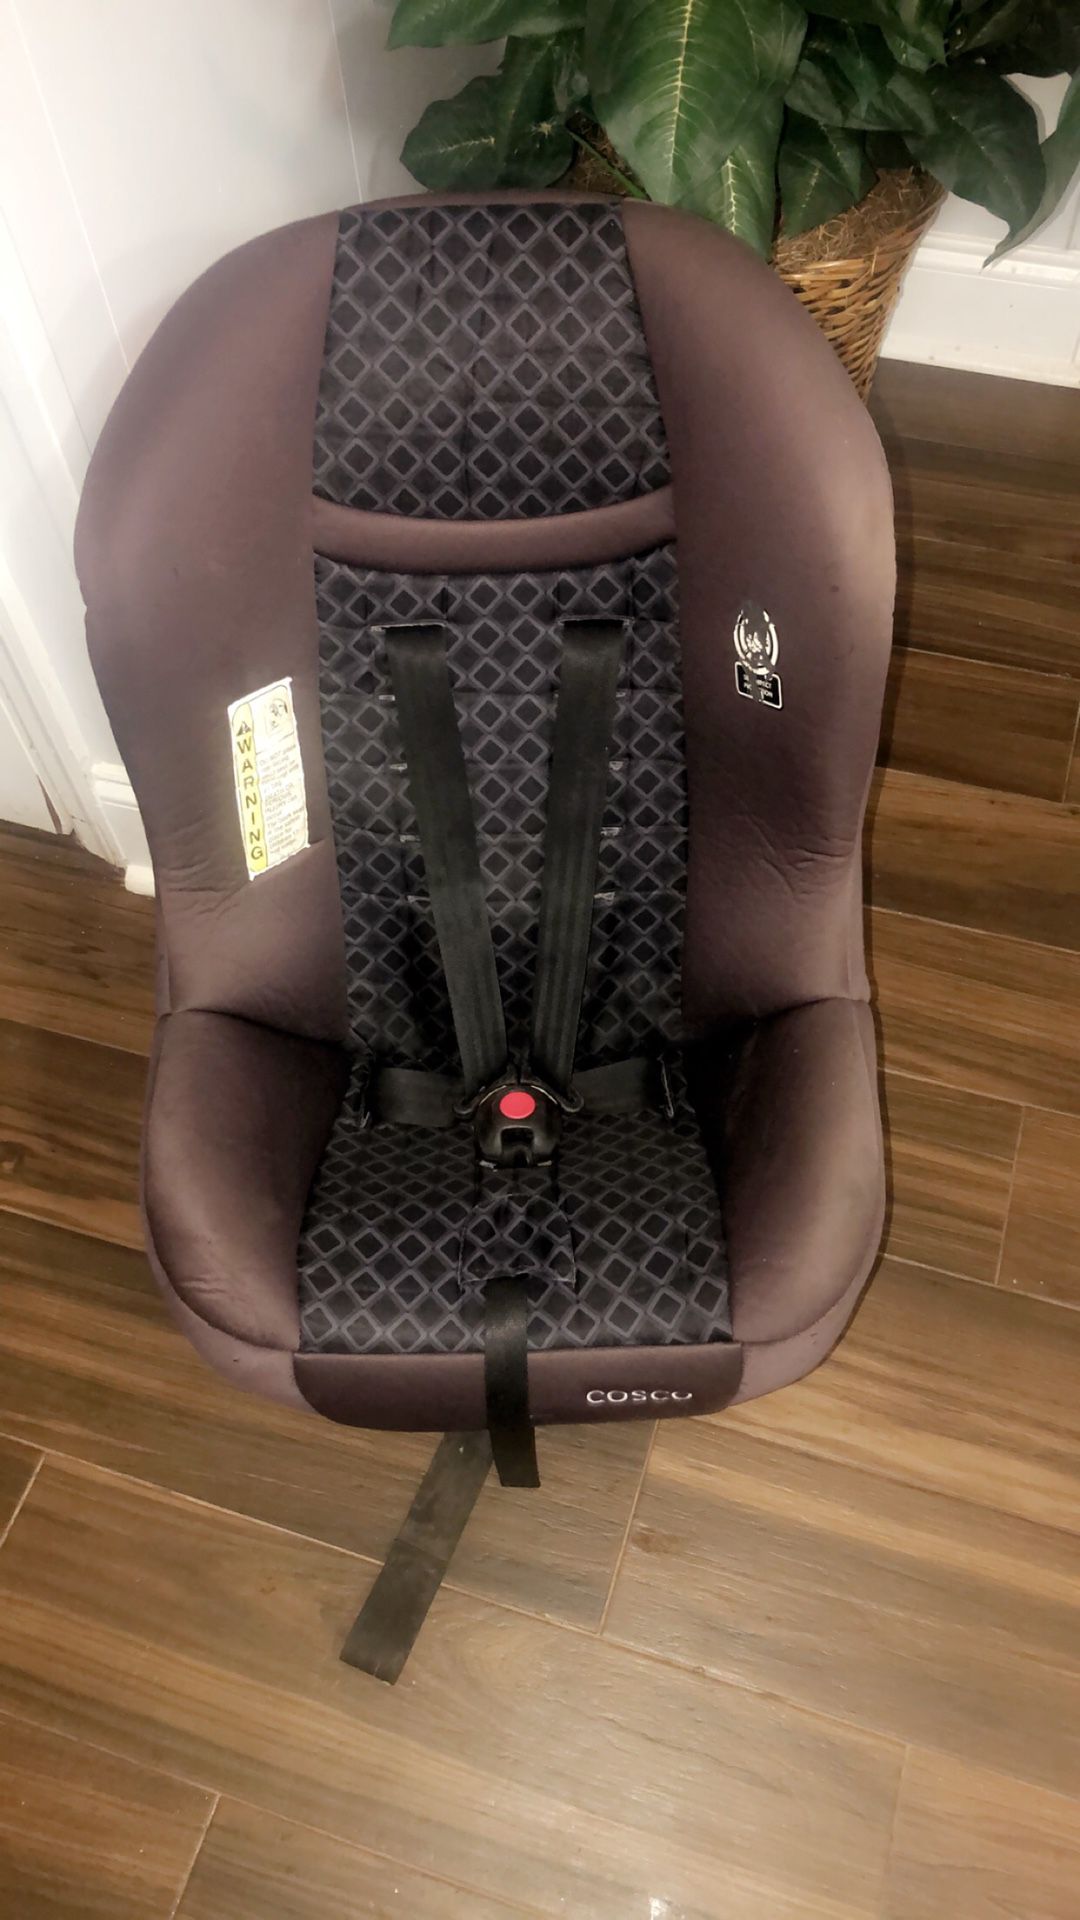 Car seat clean I washed it stain free